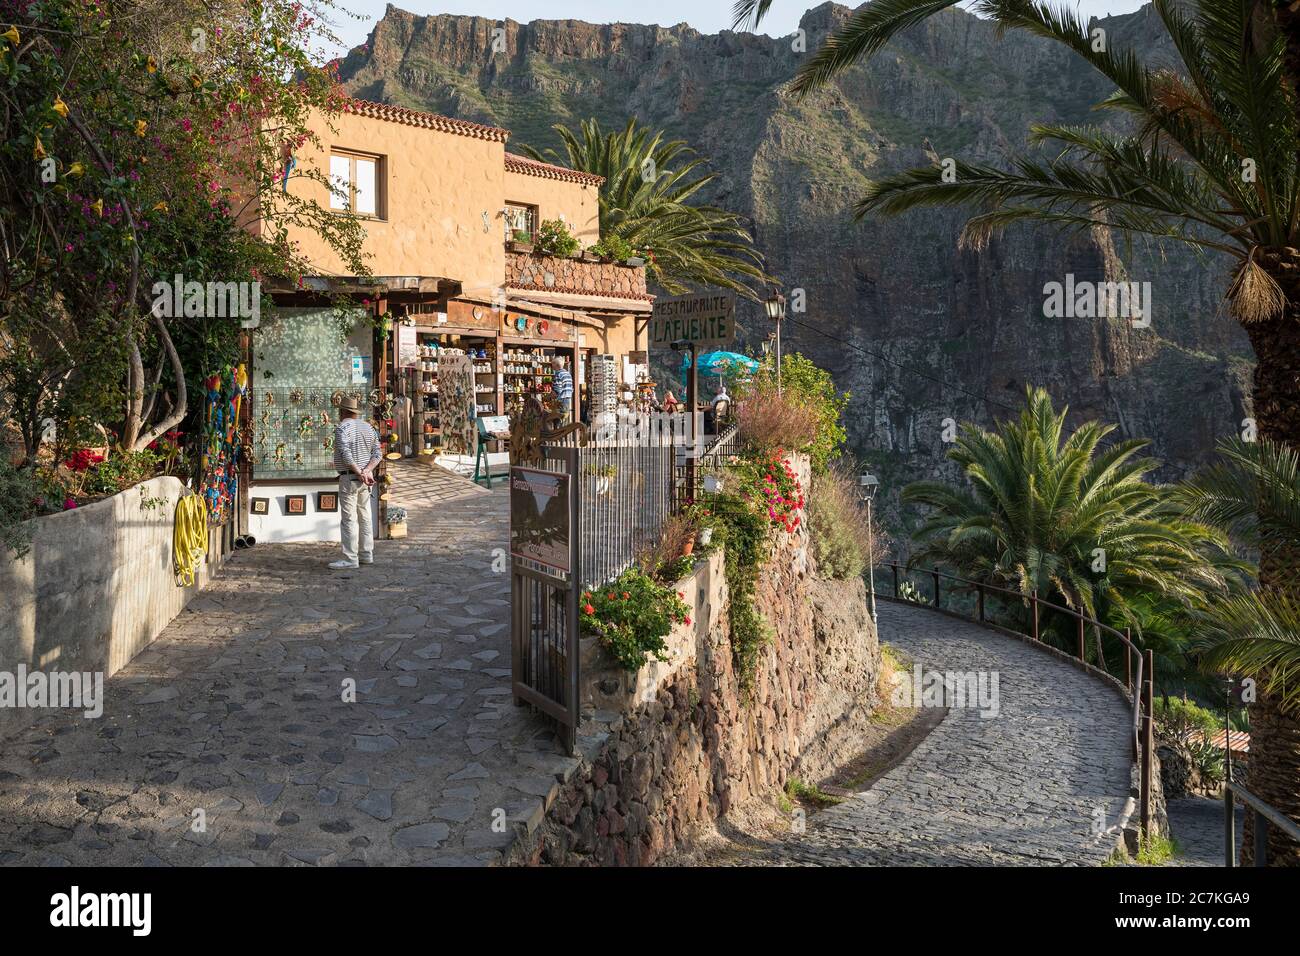 Souvenir shop and restaurant in the mountain village of Masca in the Teno Mountains, Tenerife, Canary Islands, Spain Stock Photo